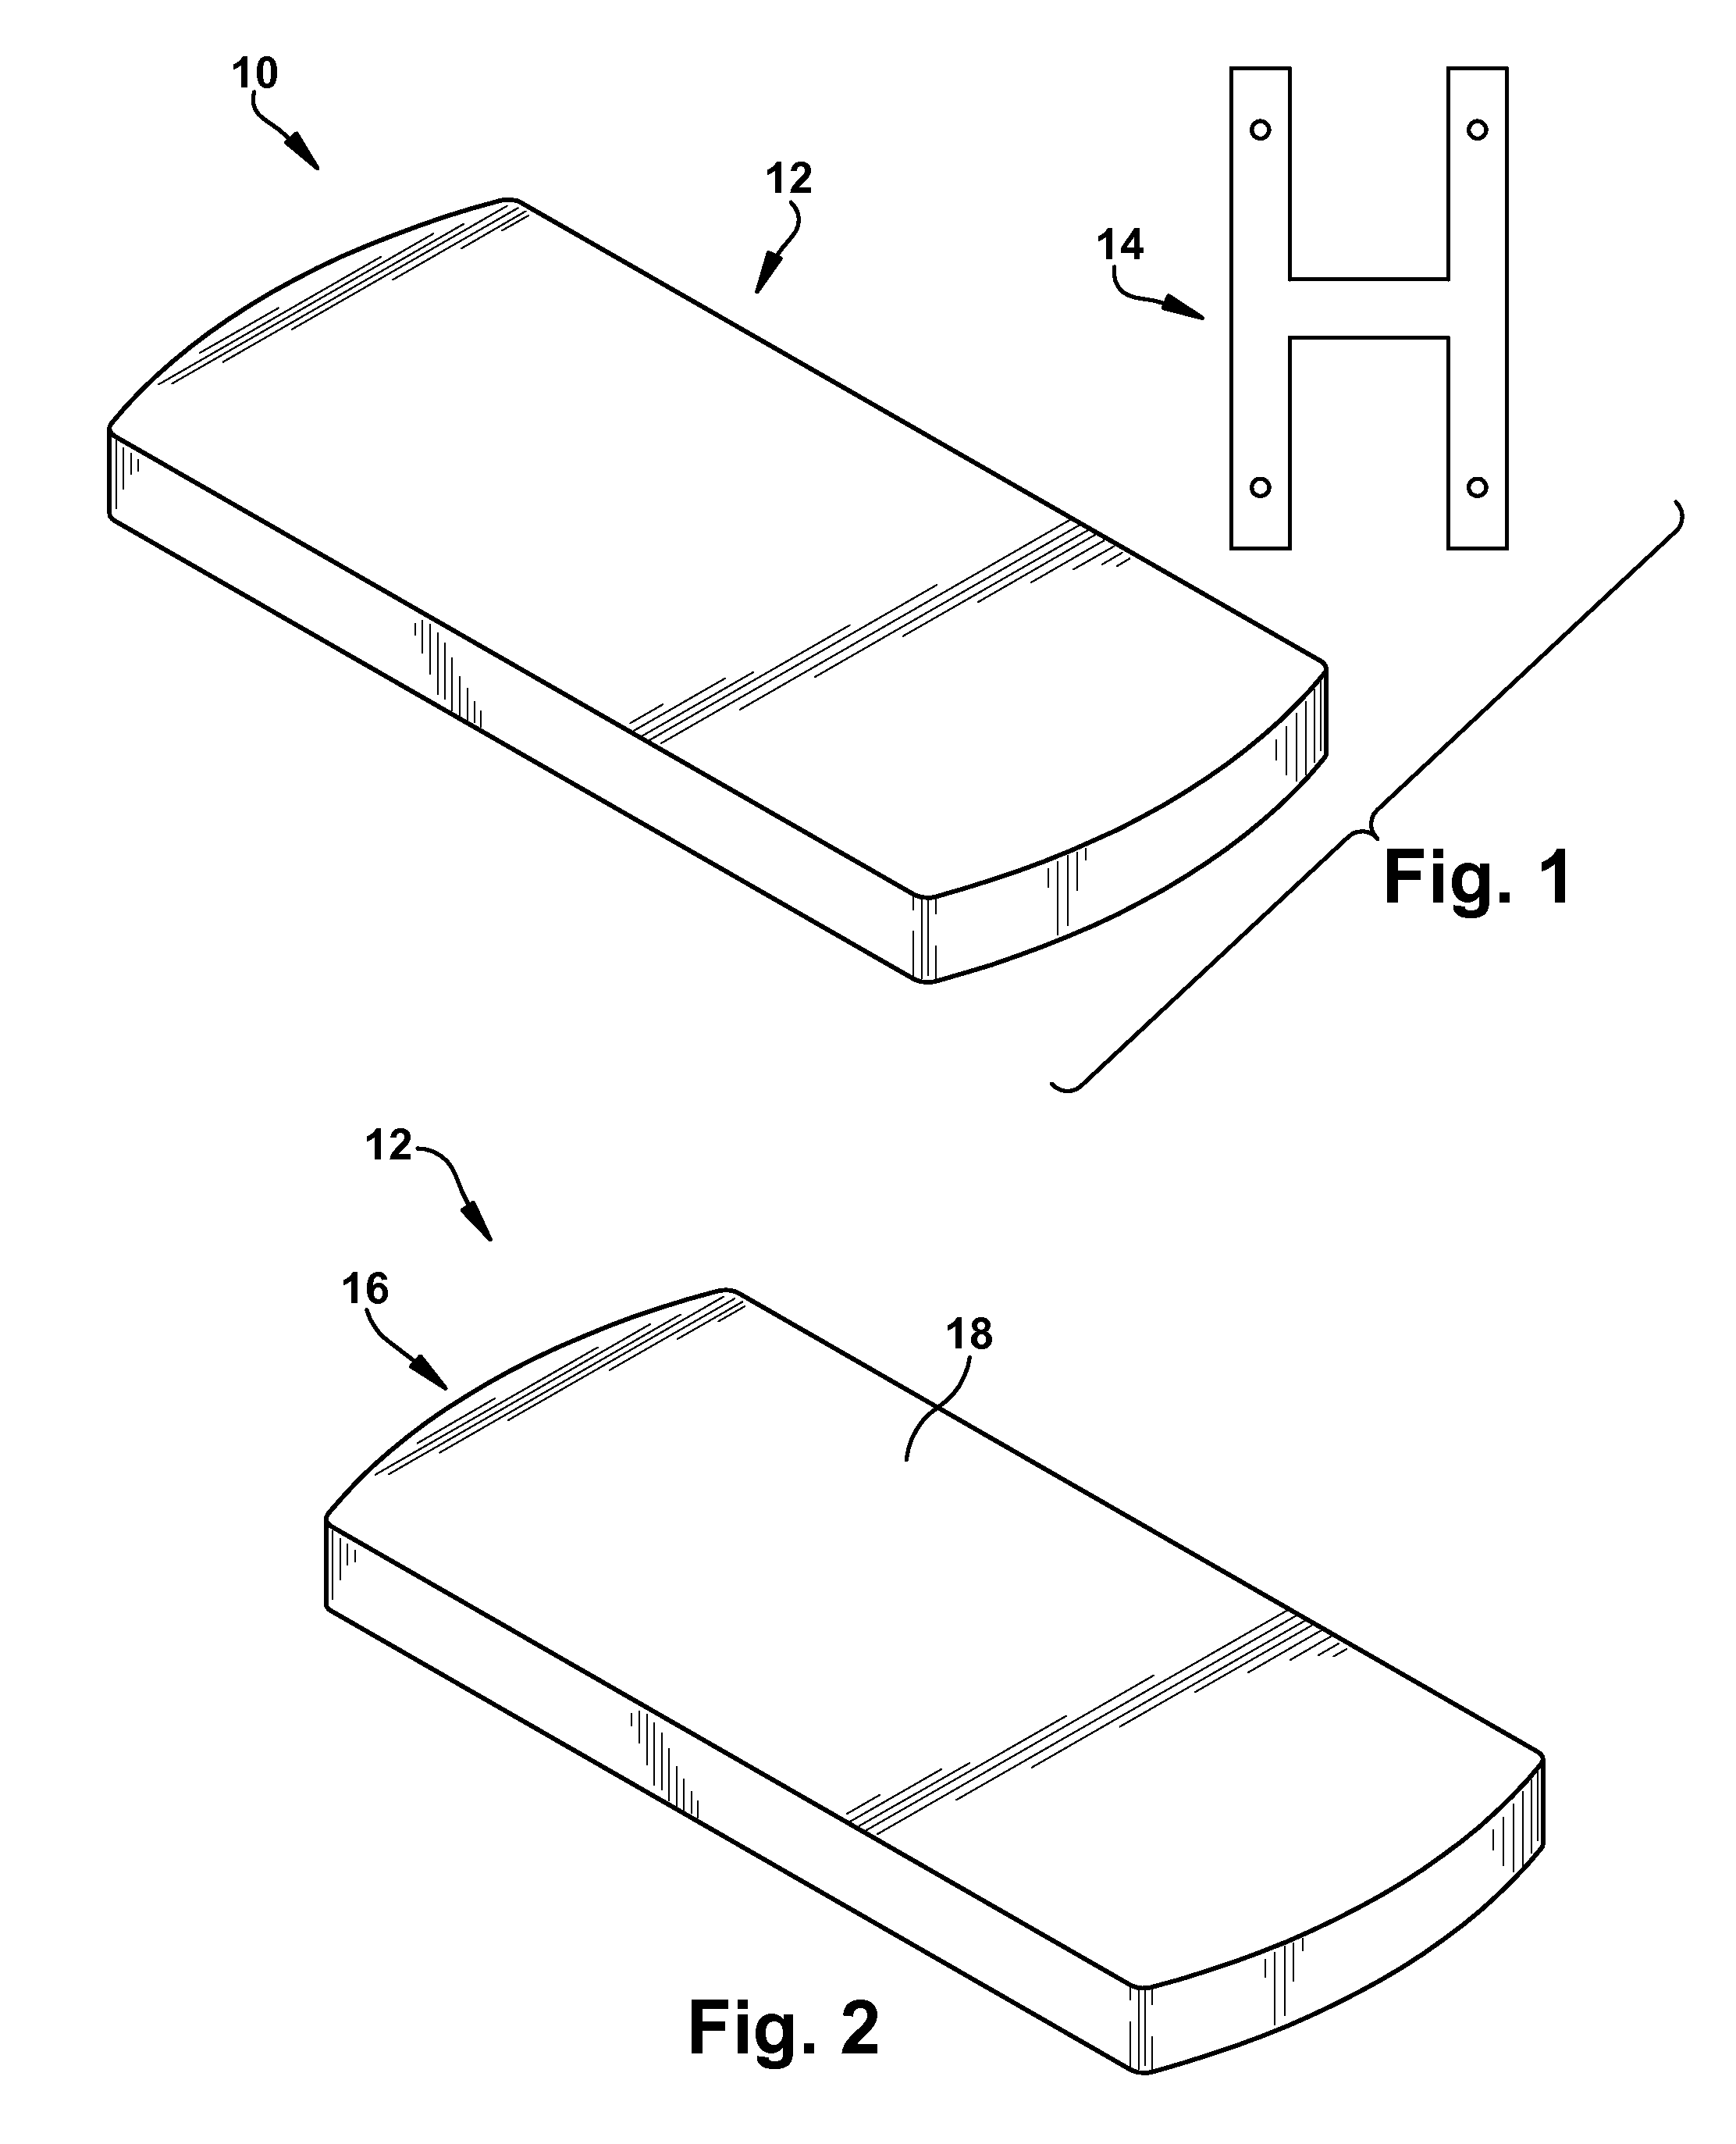 Surgical system for positioning a patient and marking locations for a surgical procedure